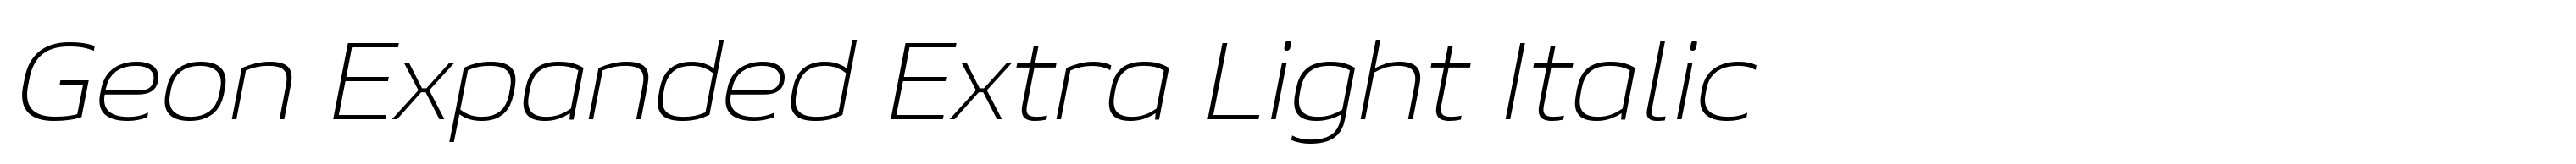 Geon Expanded Extra Light Italic